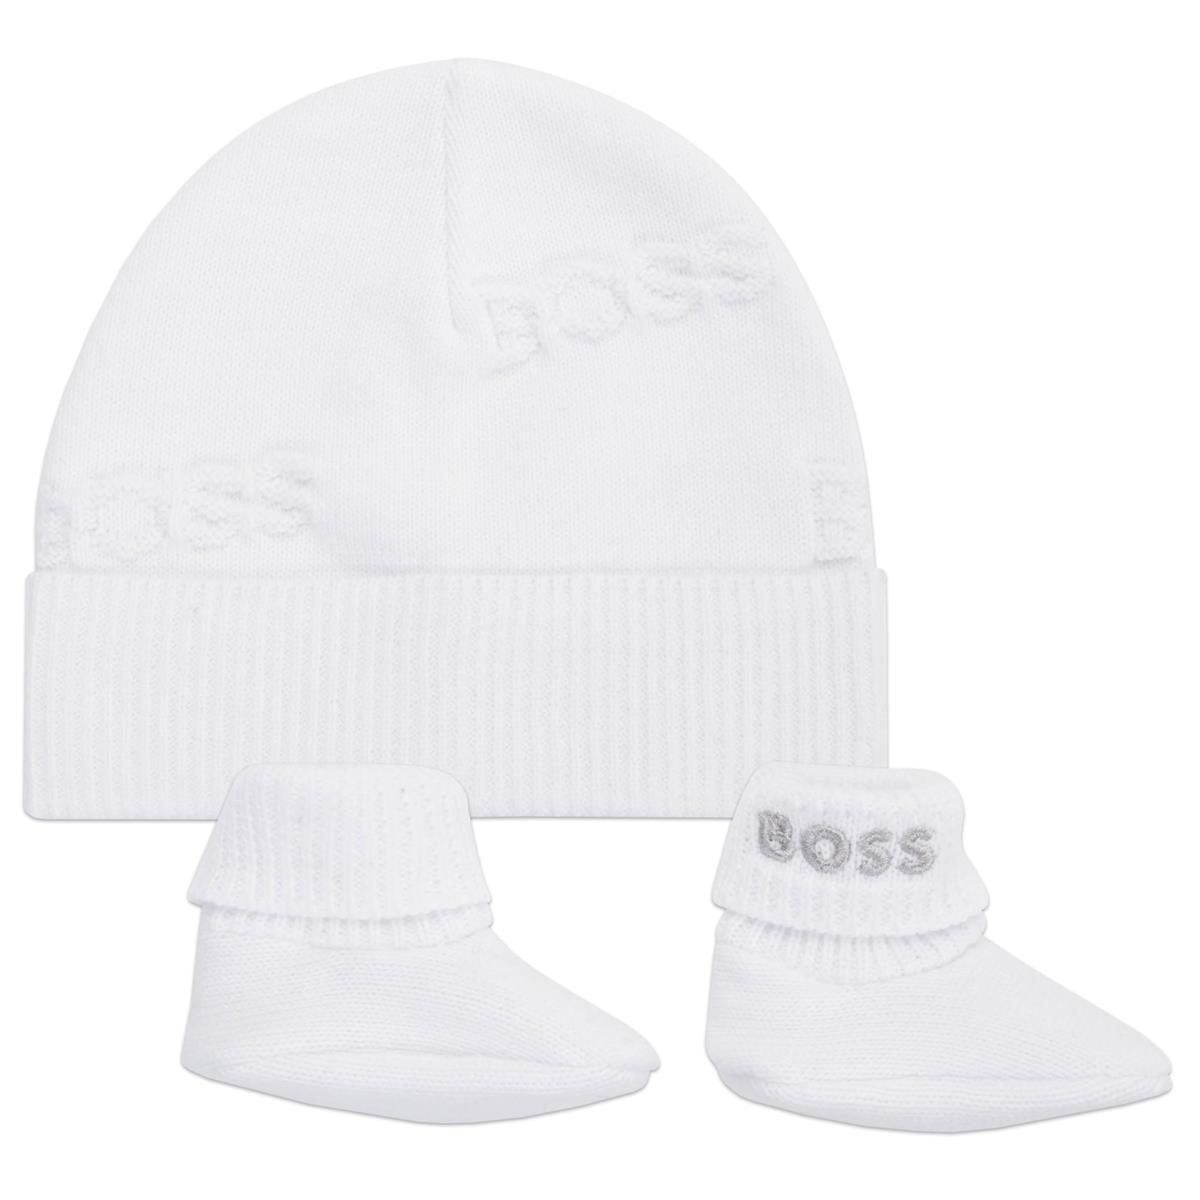 Baby Boys & Girls White Hat & Shoes